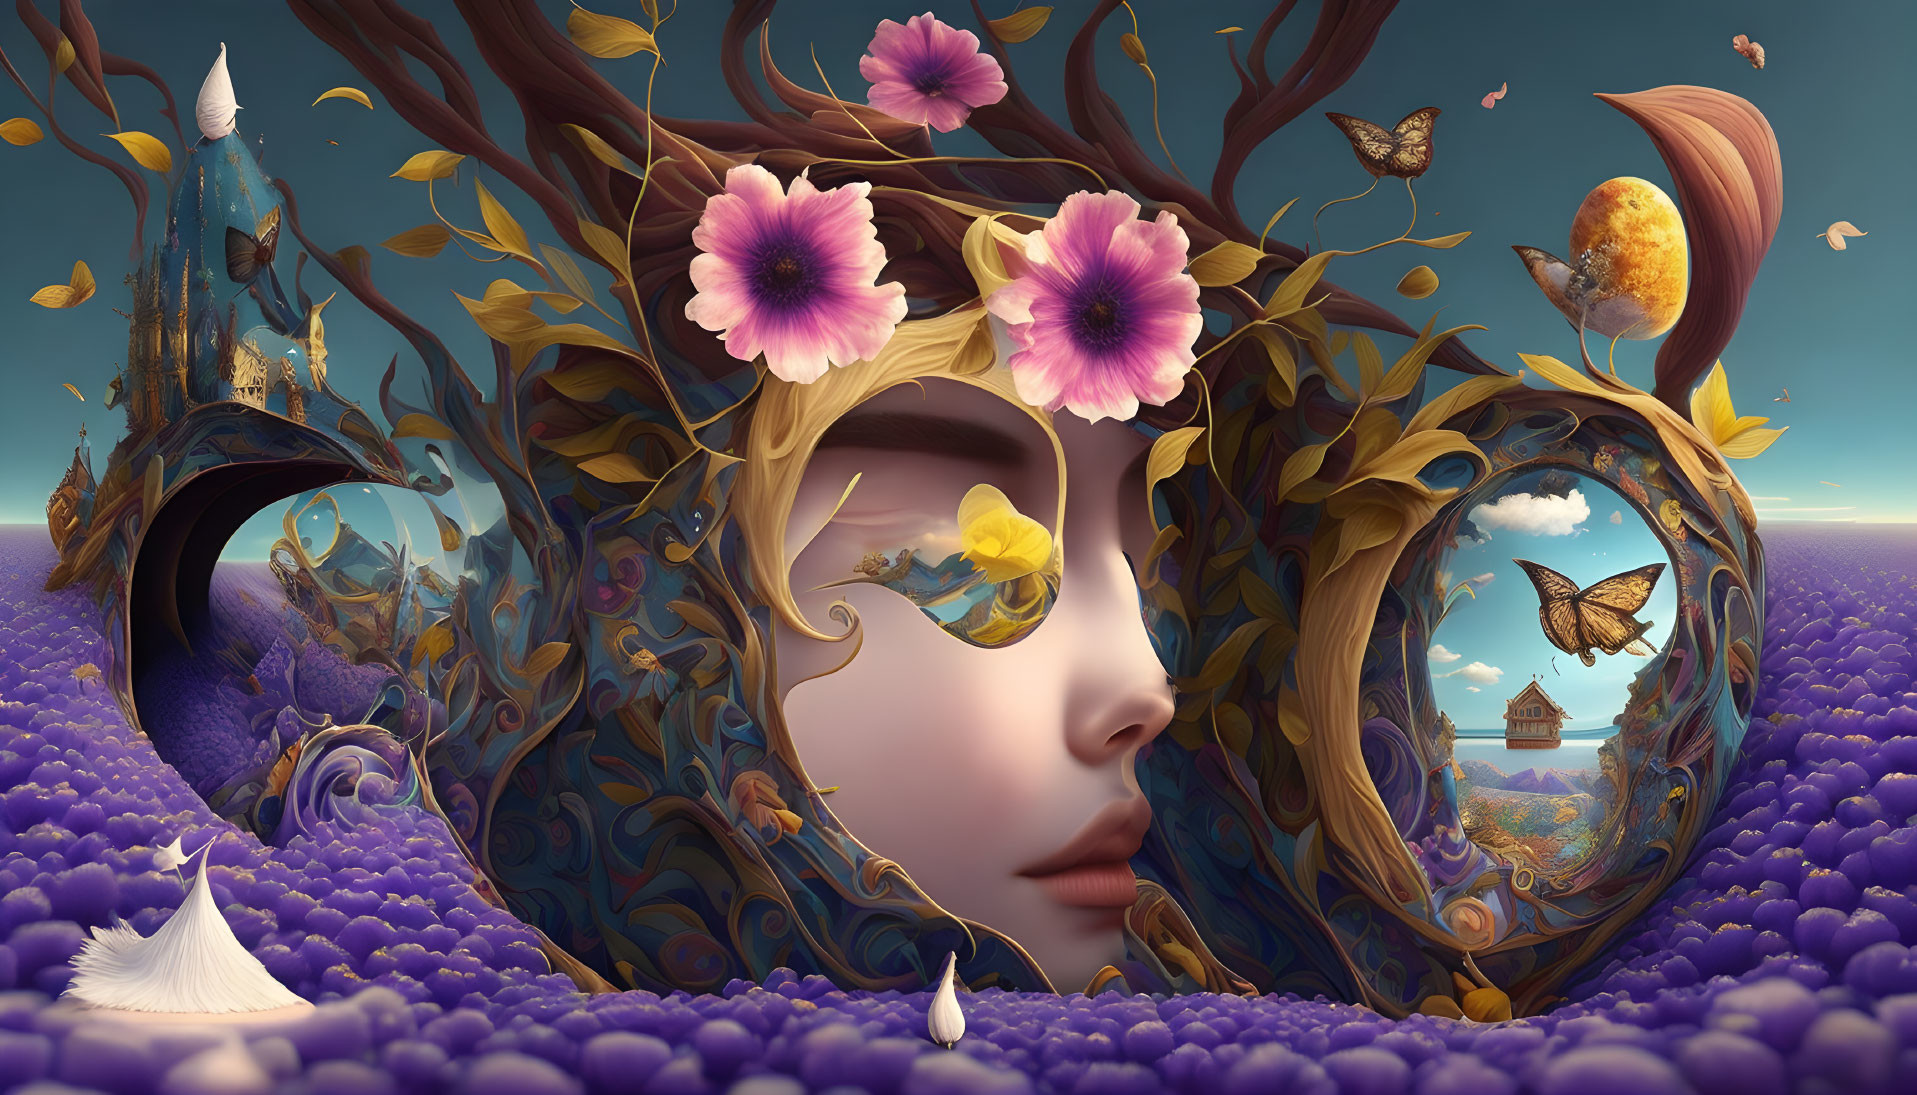 Surreal female face in fantasy landscape with flowers and butterflies